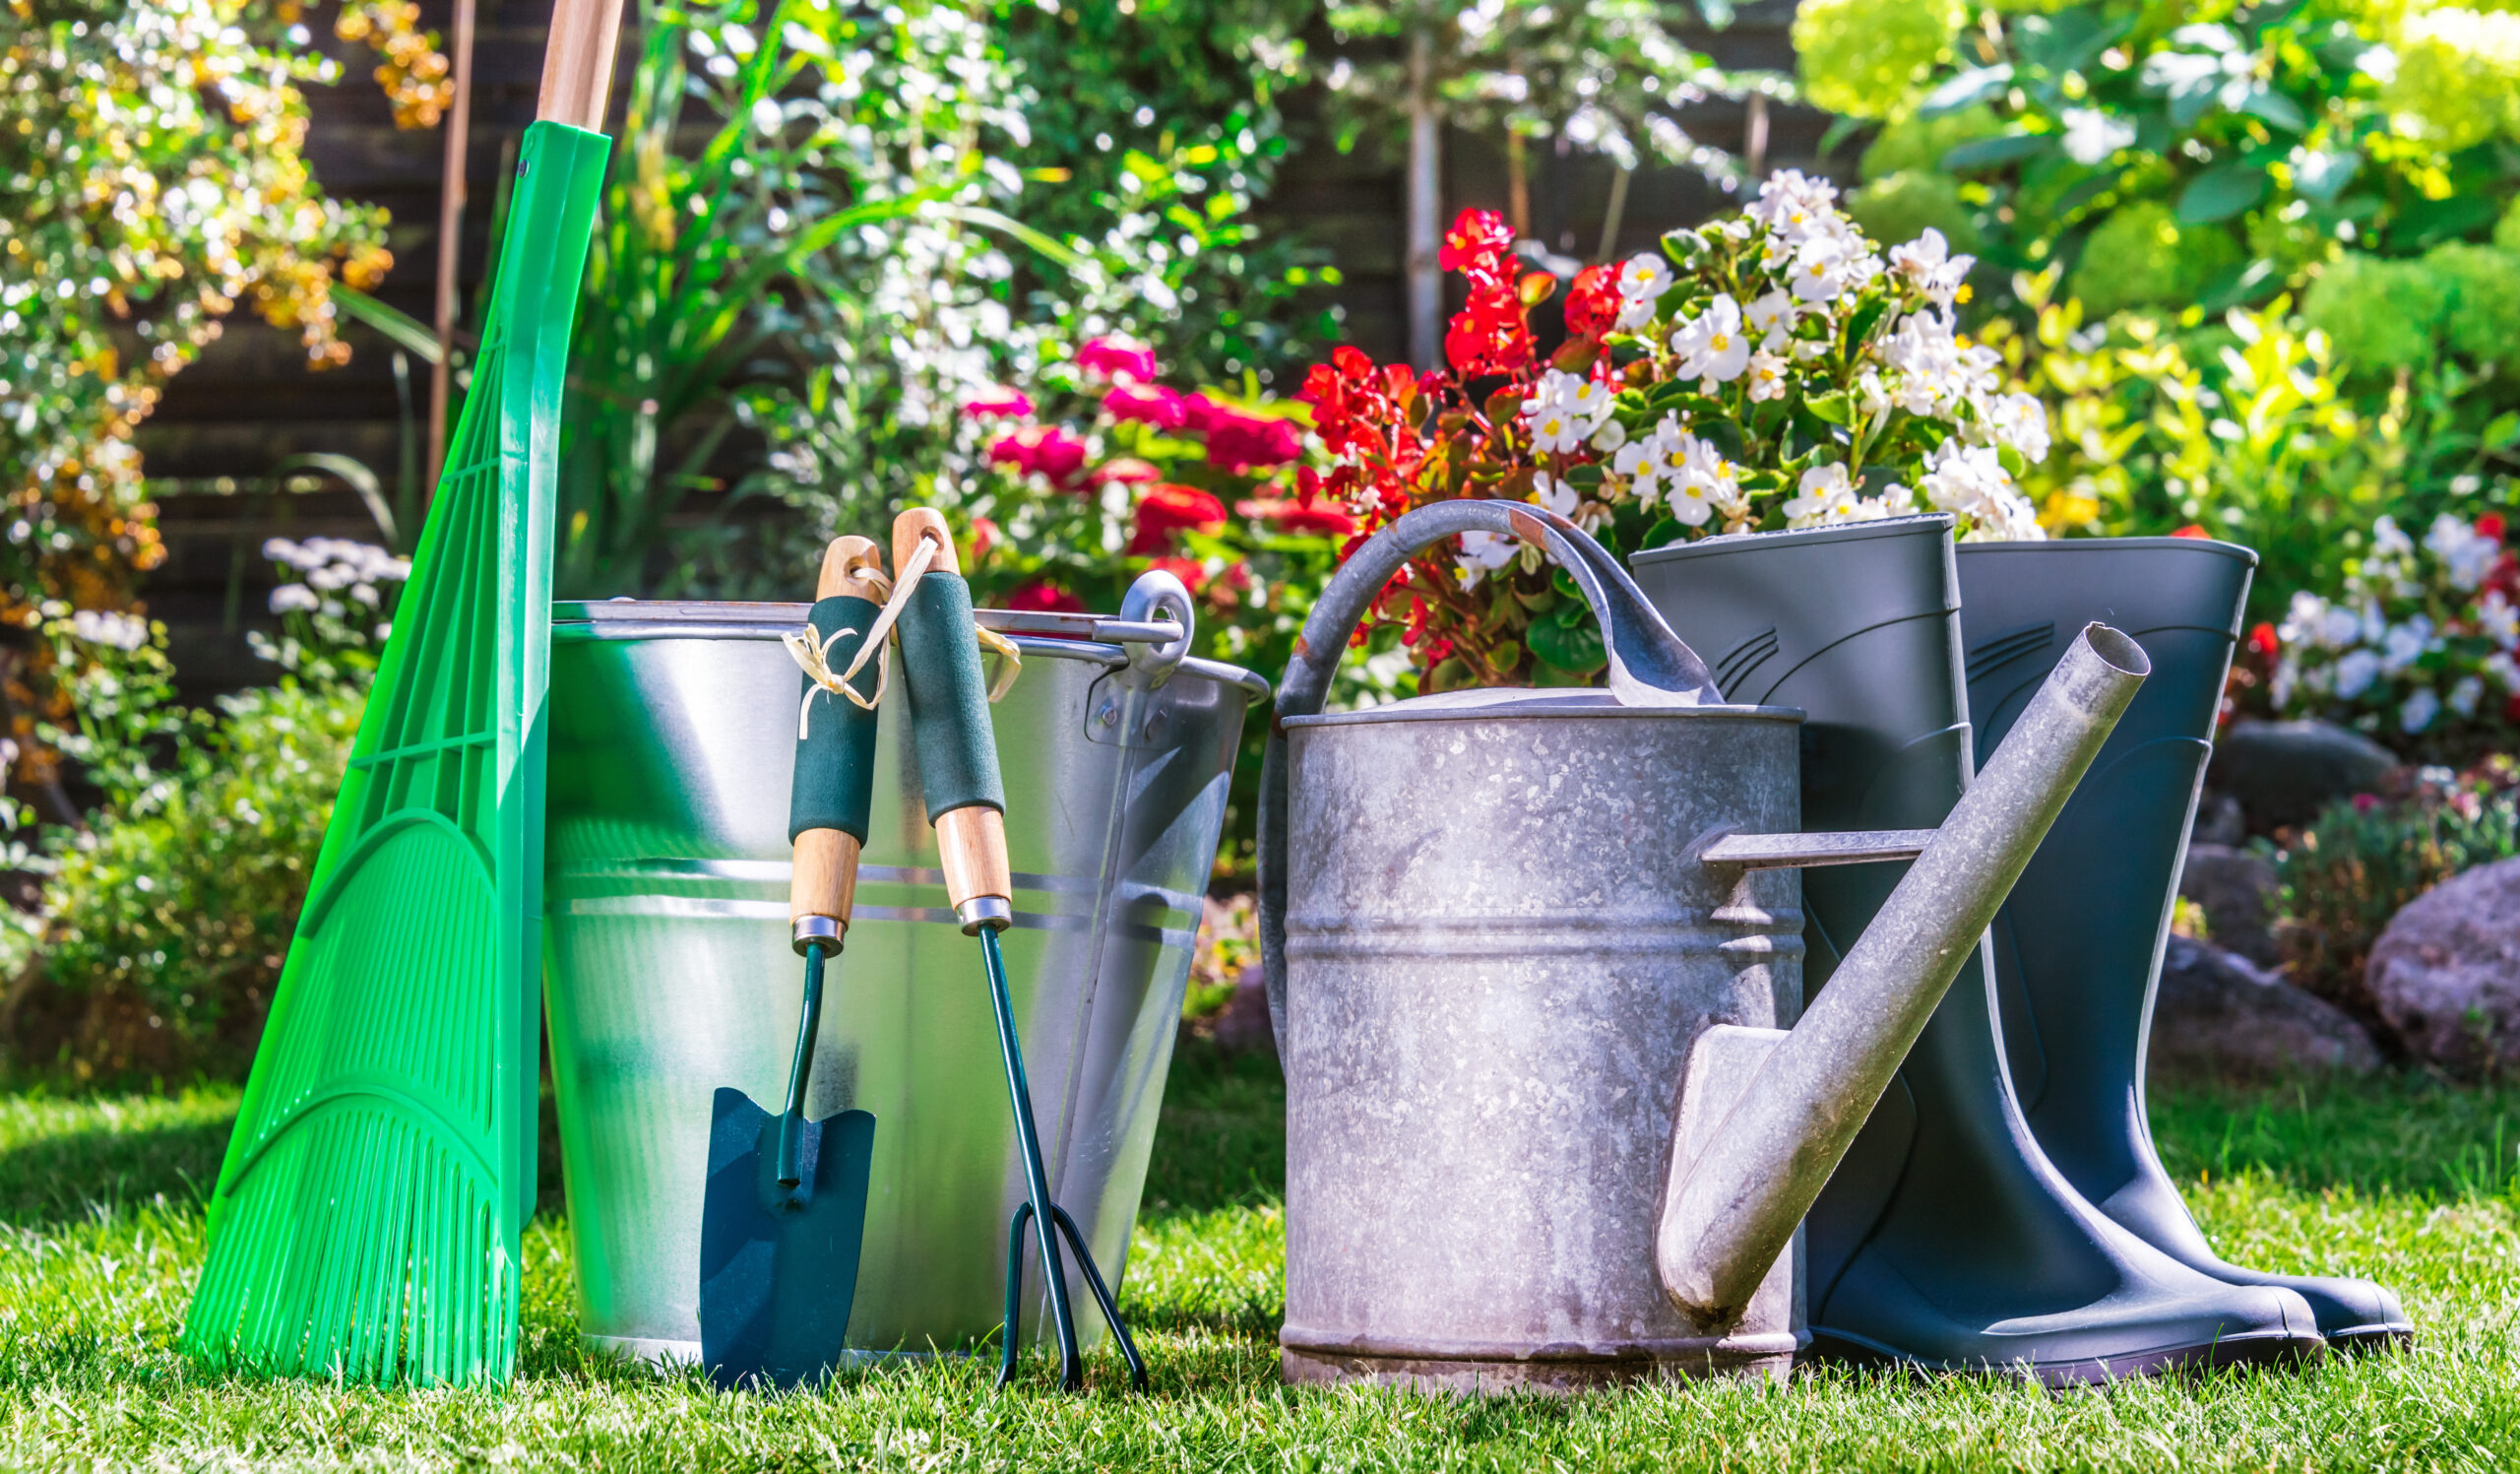 How to Make Your Garden Summer Ready